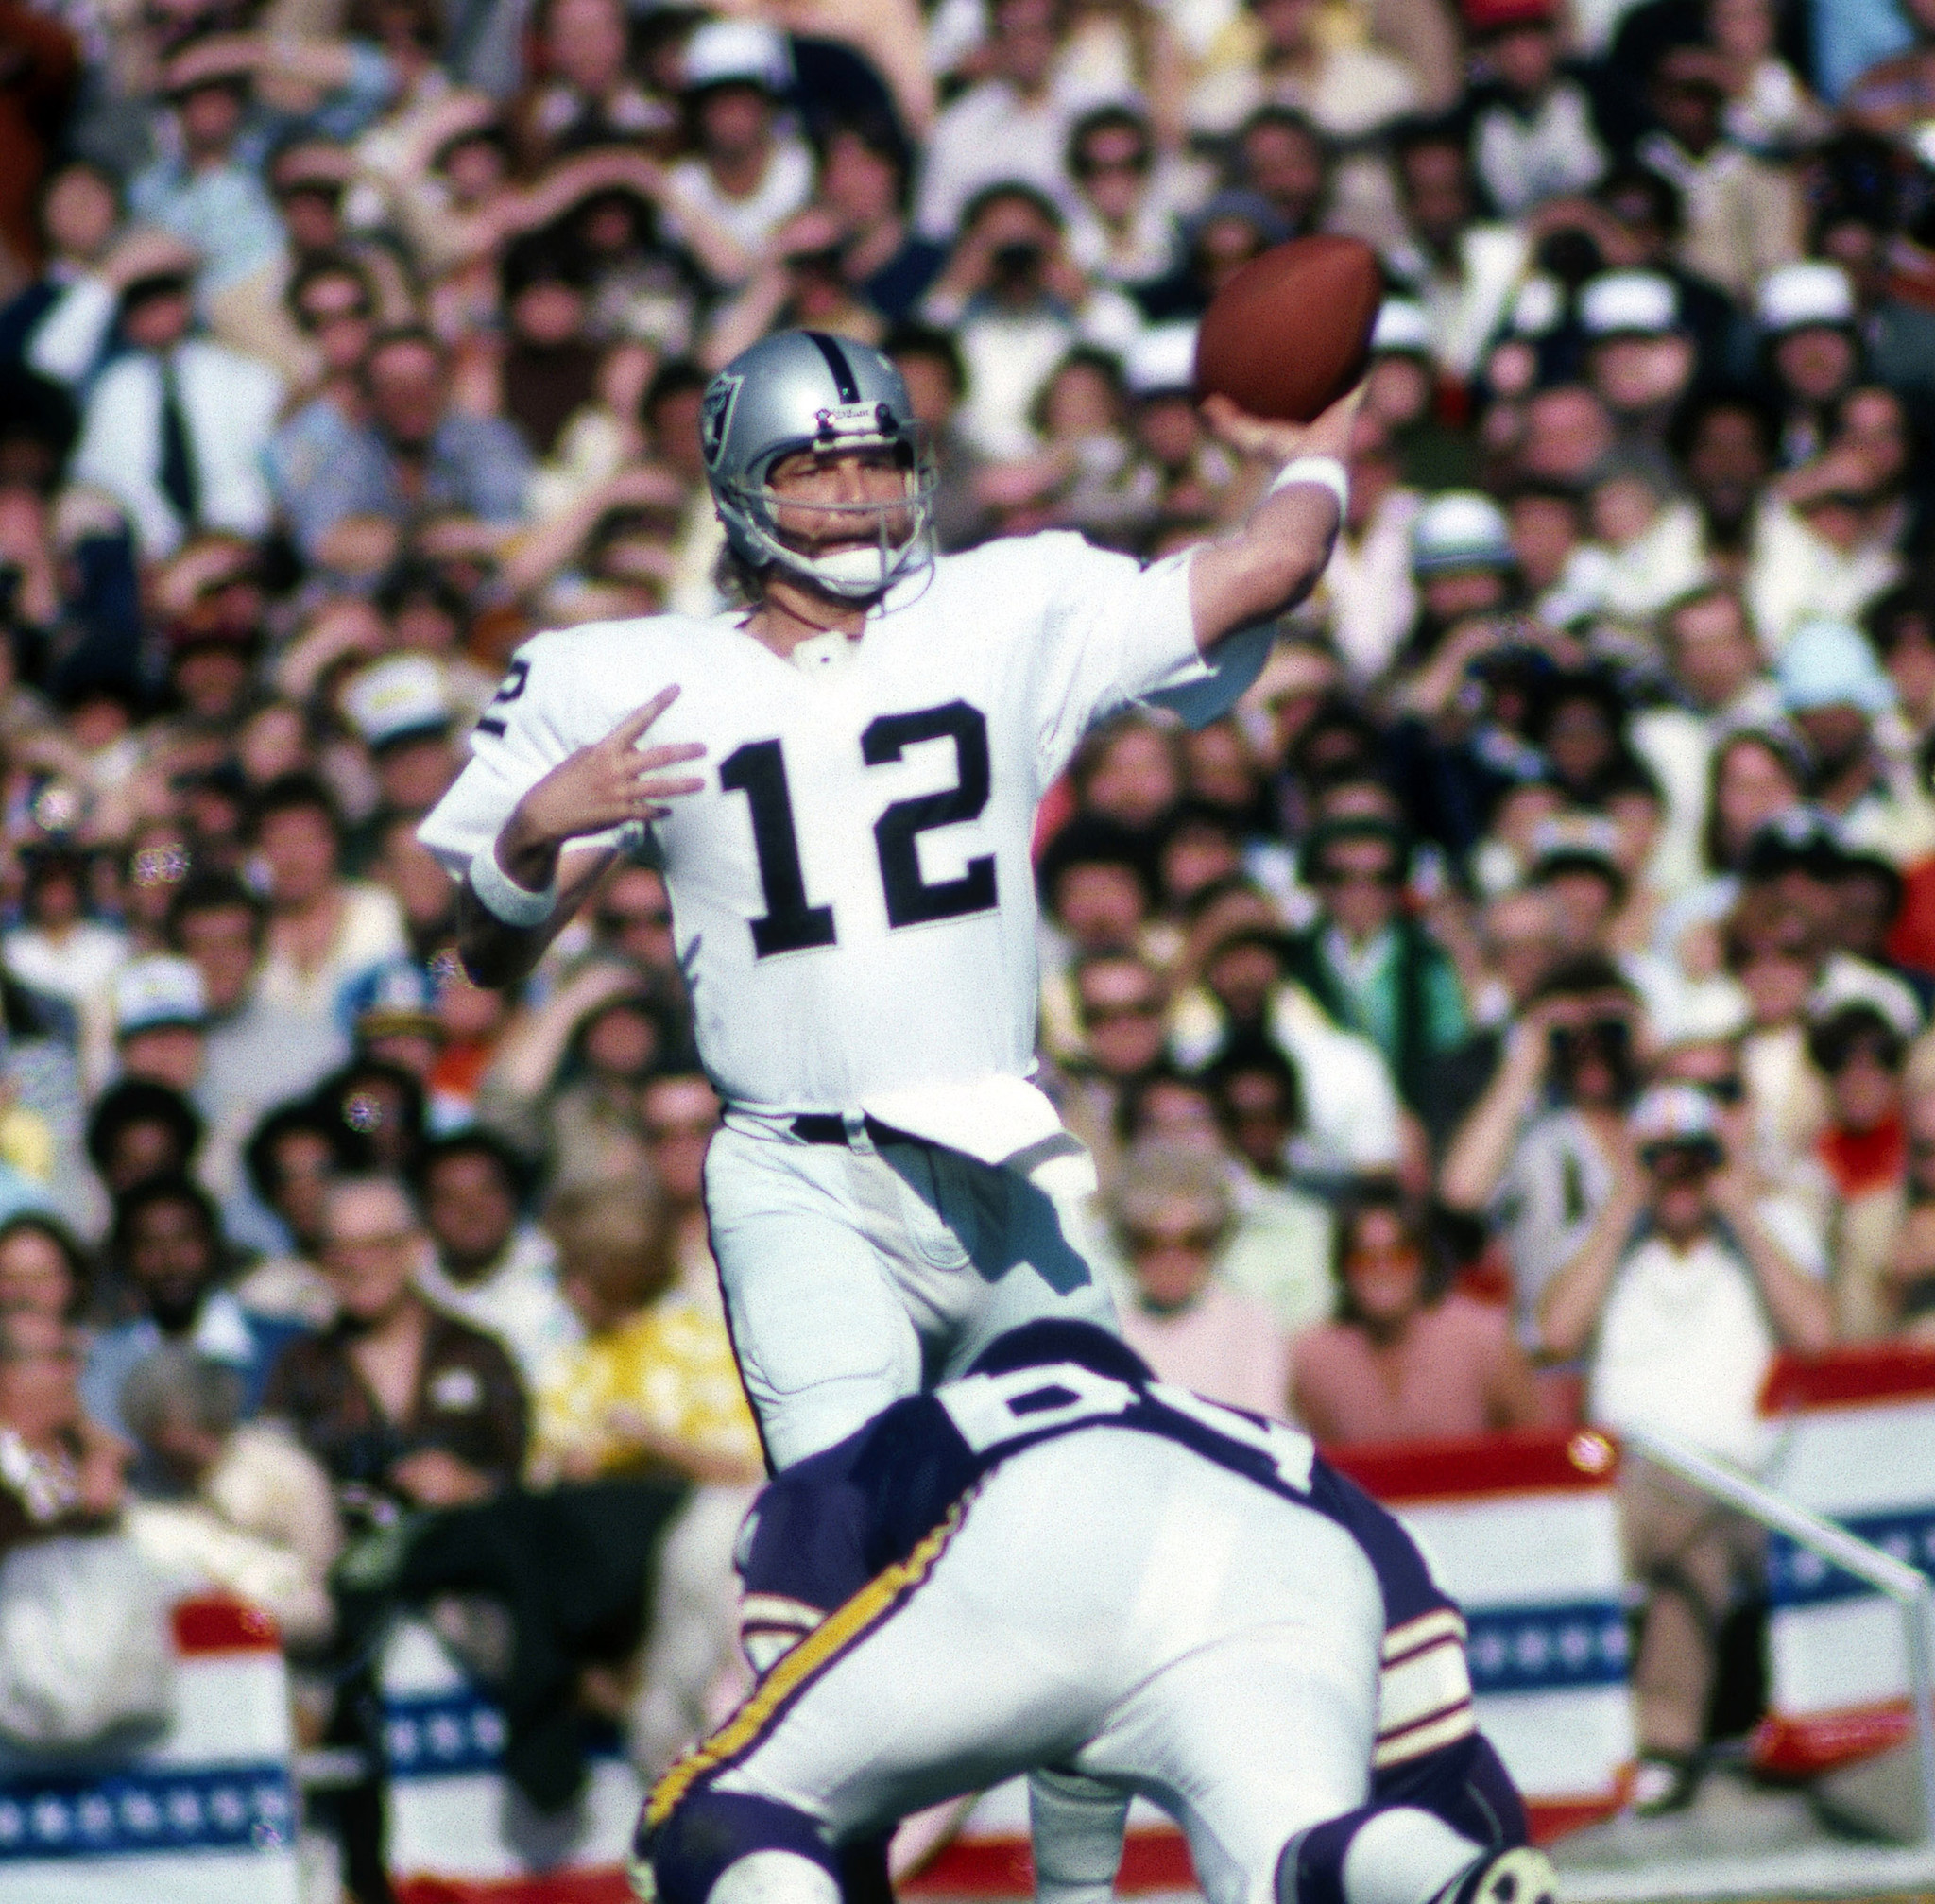 Legendary Raiders quarterback Ken Stabler dies of colon cancer at age 69 - Daily Press2048 x 2015